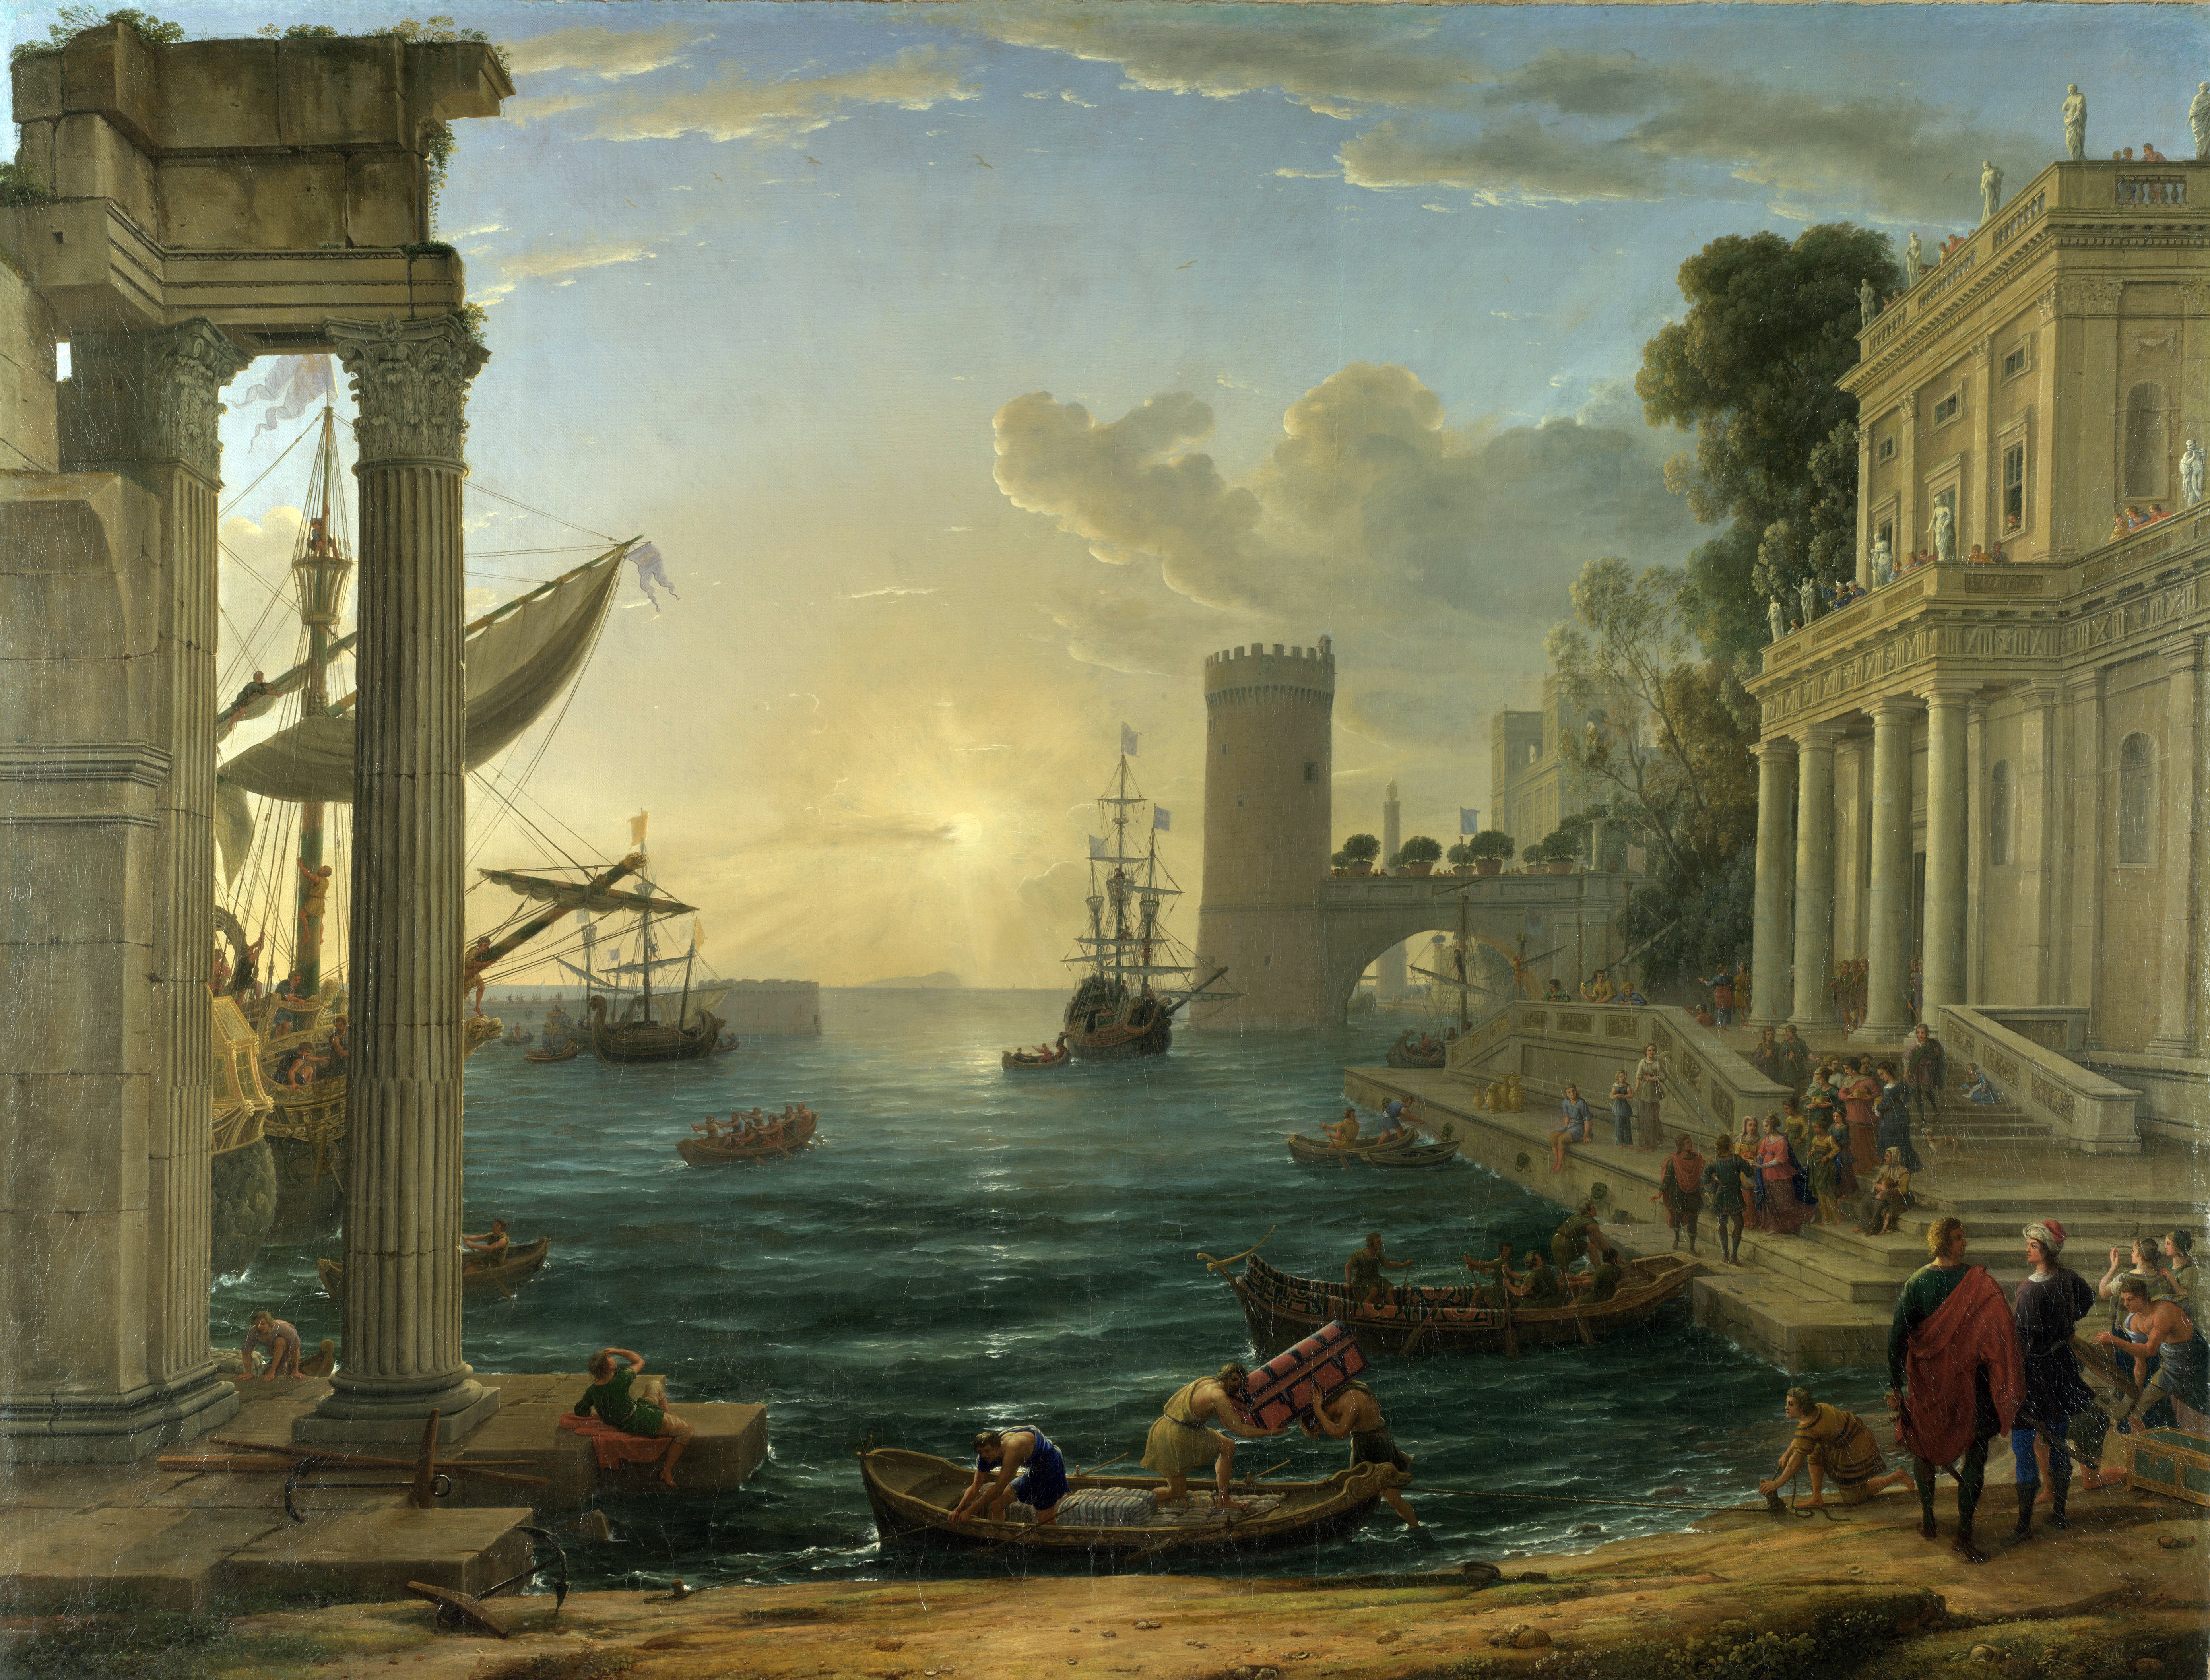 Seaport with the Embarkation of the Queen of Sheba by Claude Lorrain - 1648 - 148 x 194 cm National Gallery